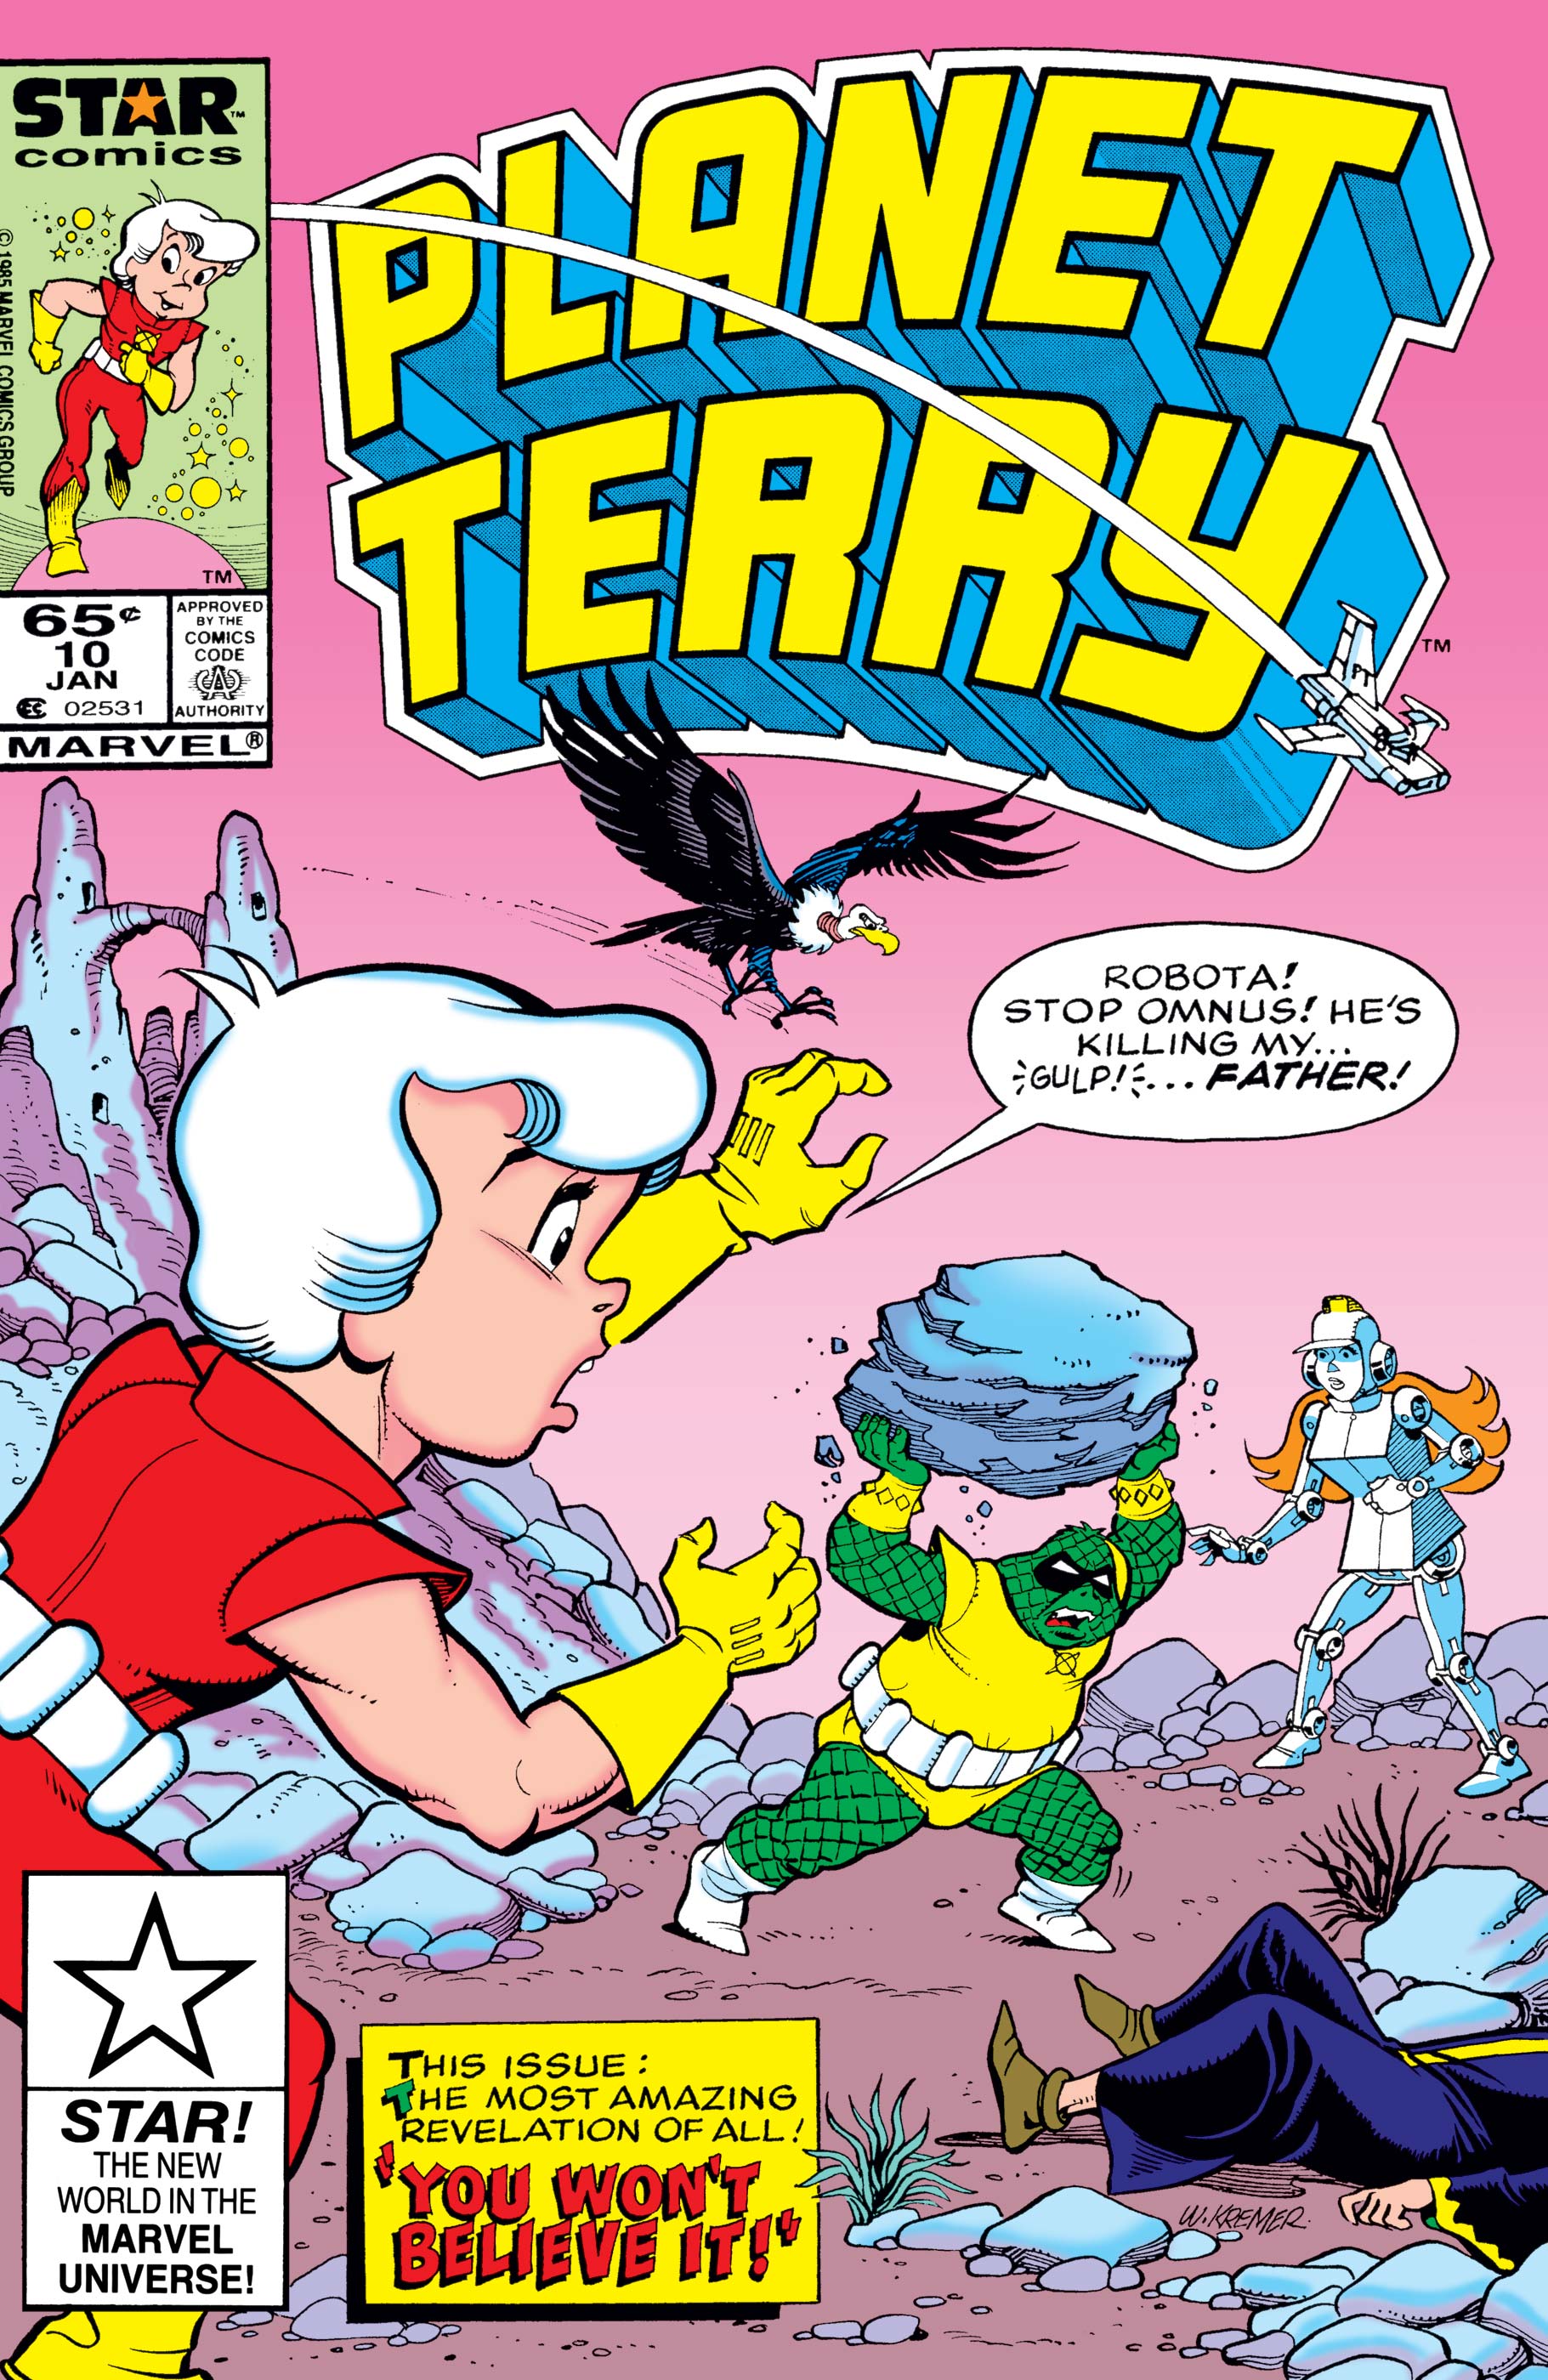 Planet Terry (1985) #10